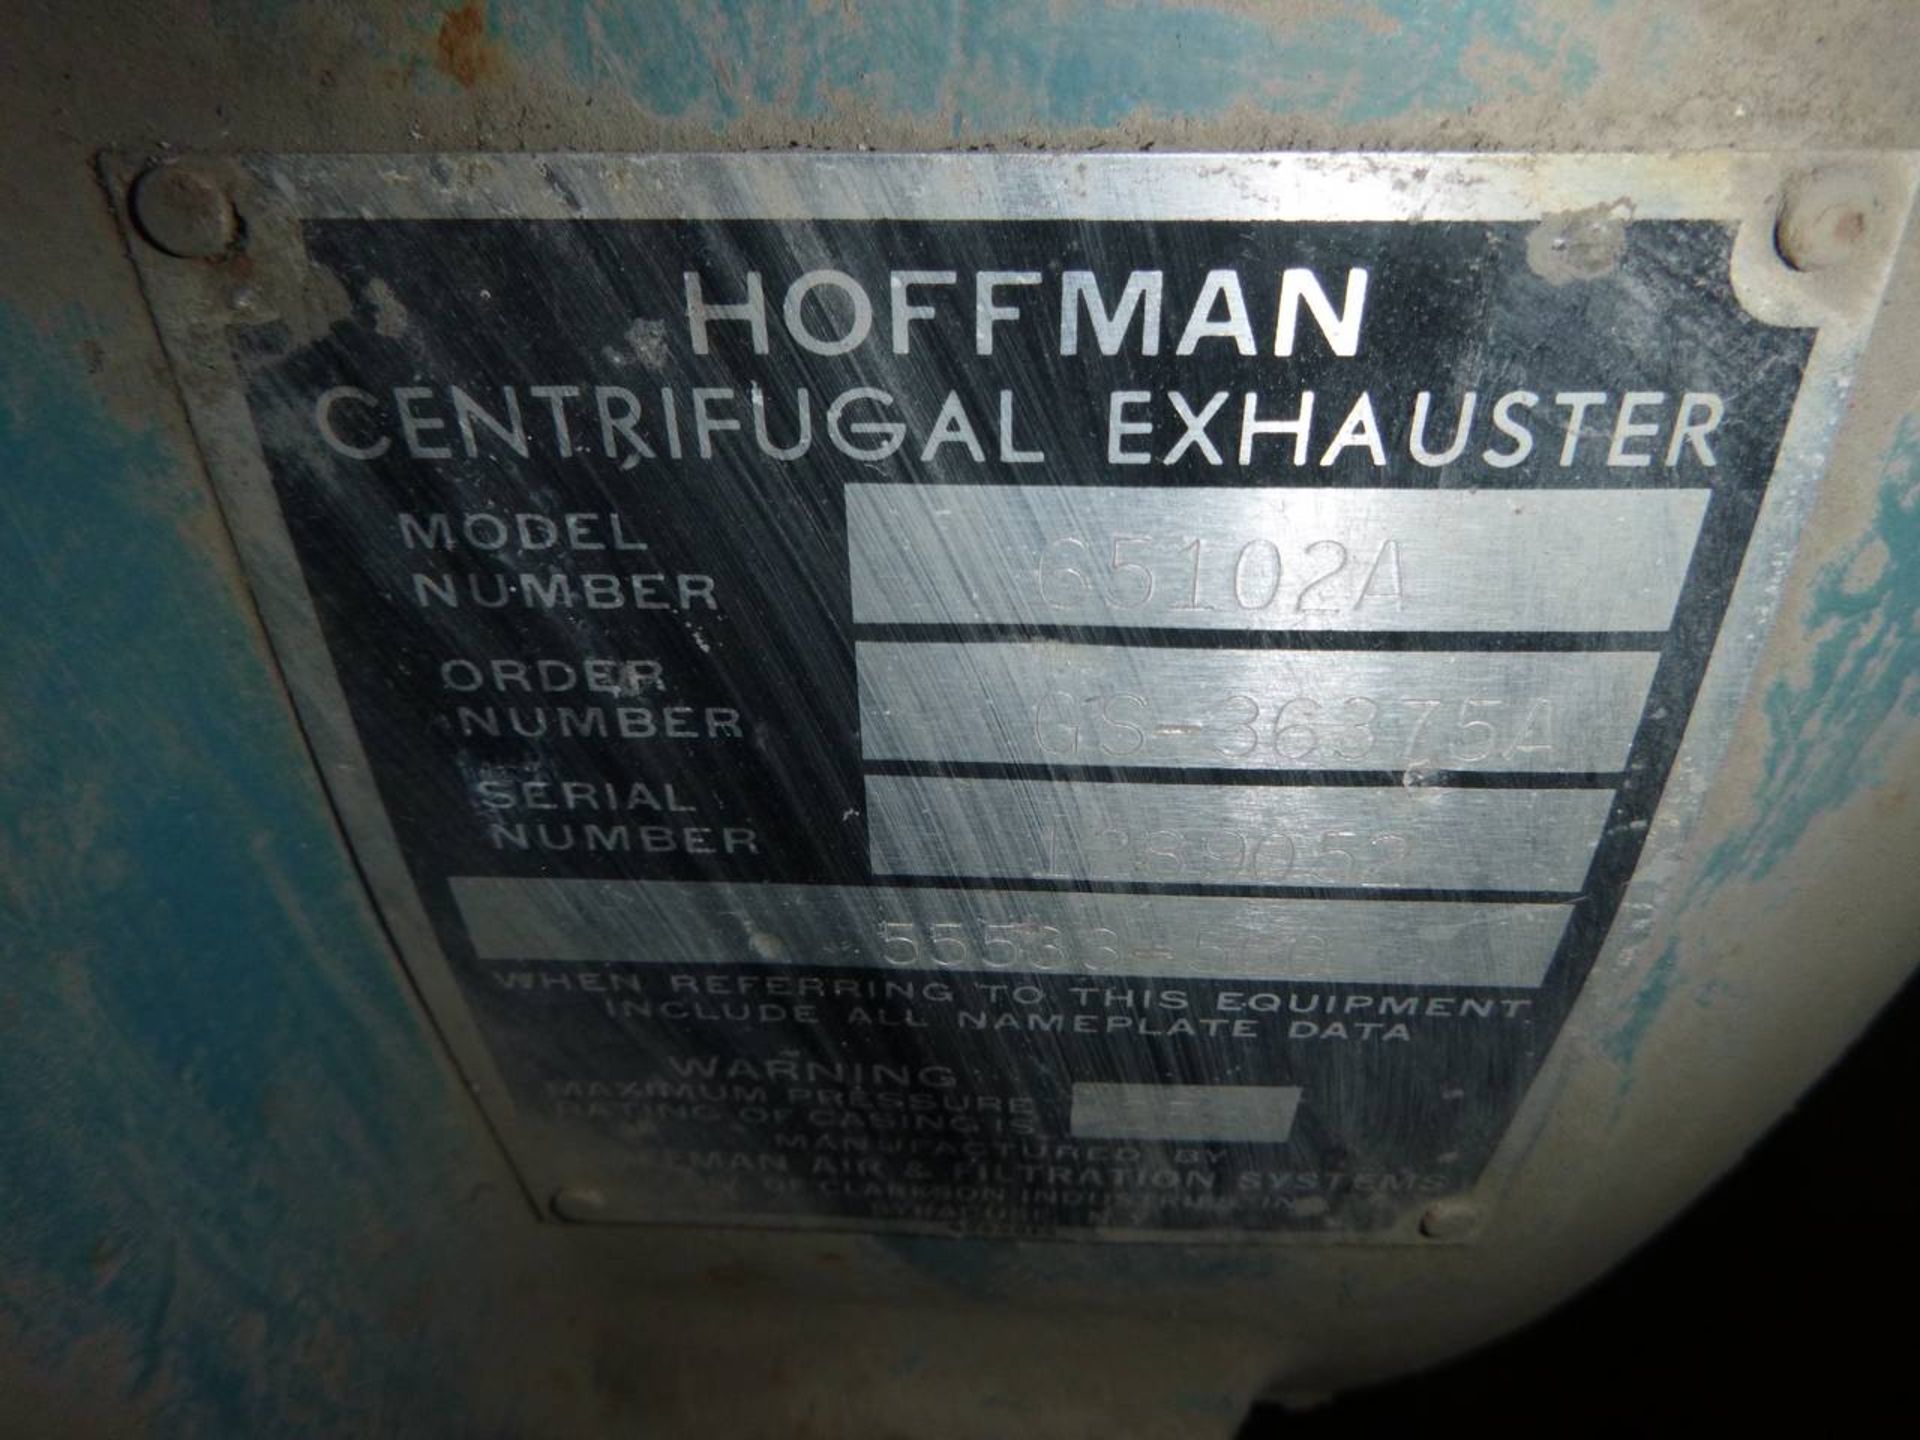 Hoffman 65102A Centrifugal exhauster - Image 2 of 2